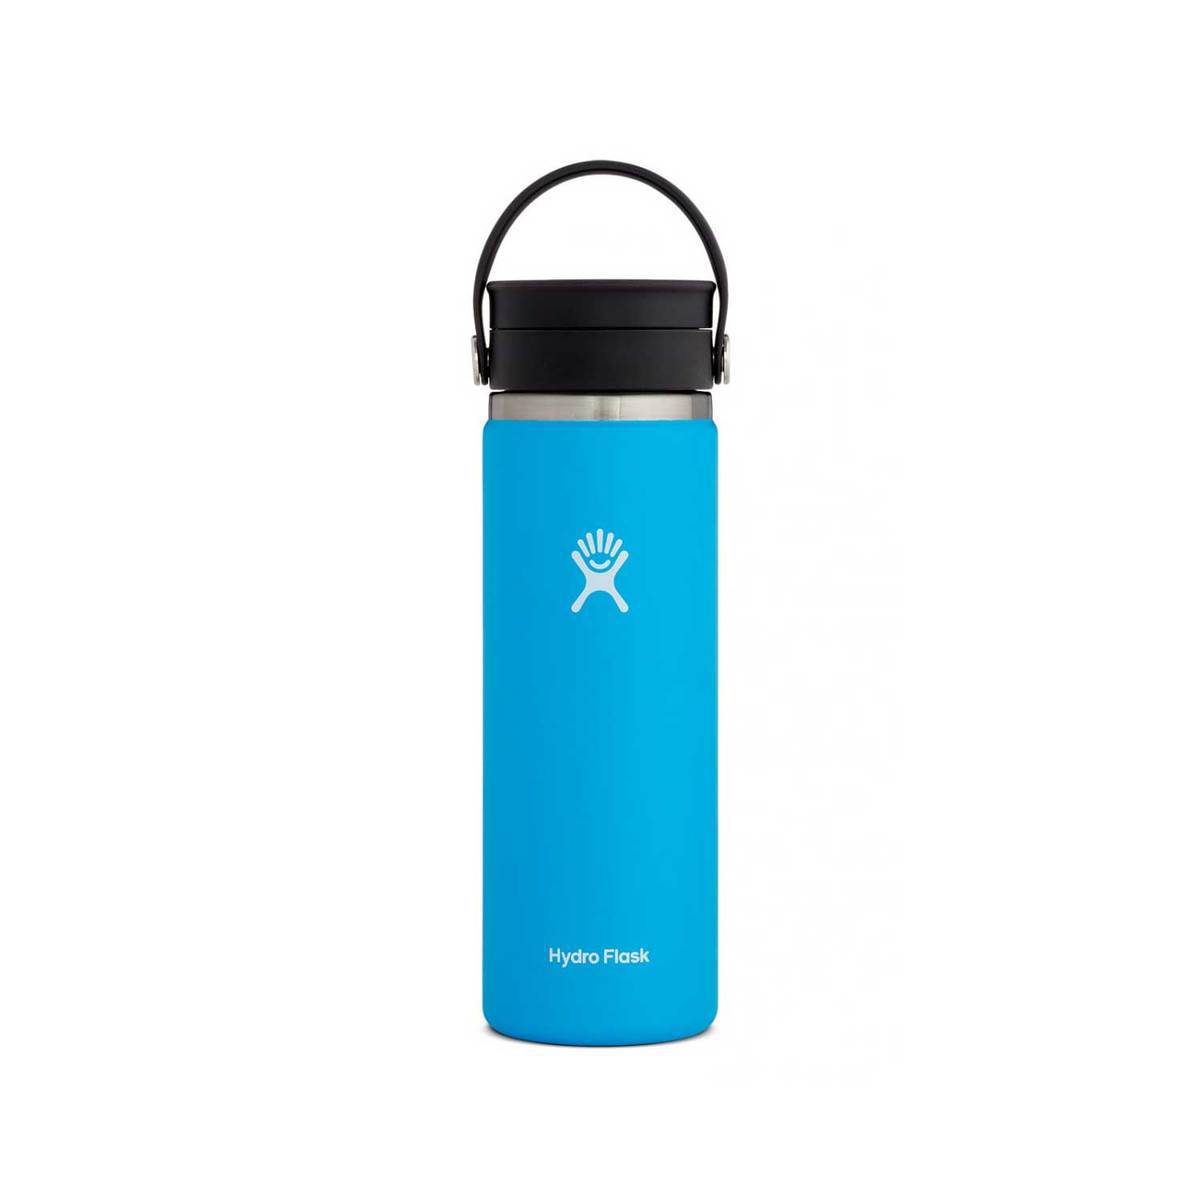 Hydro Flask 20oz Wide Mouth with Flex Cap Insulated Bottle - Pacific ...